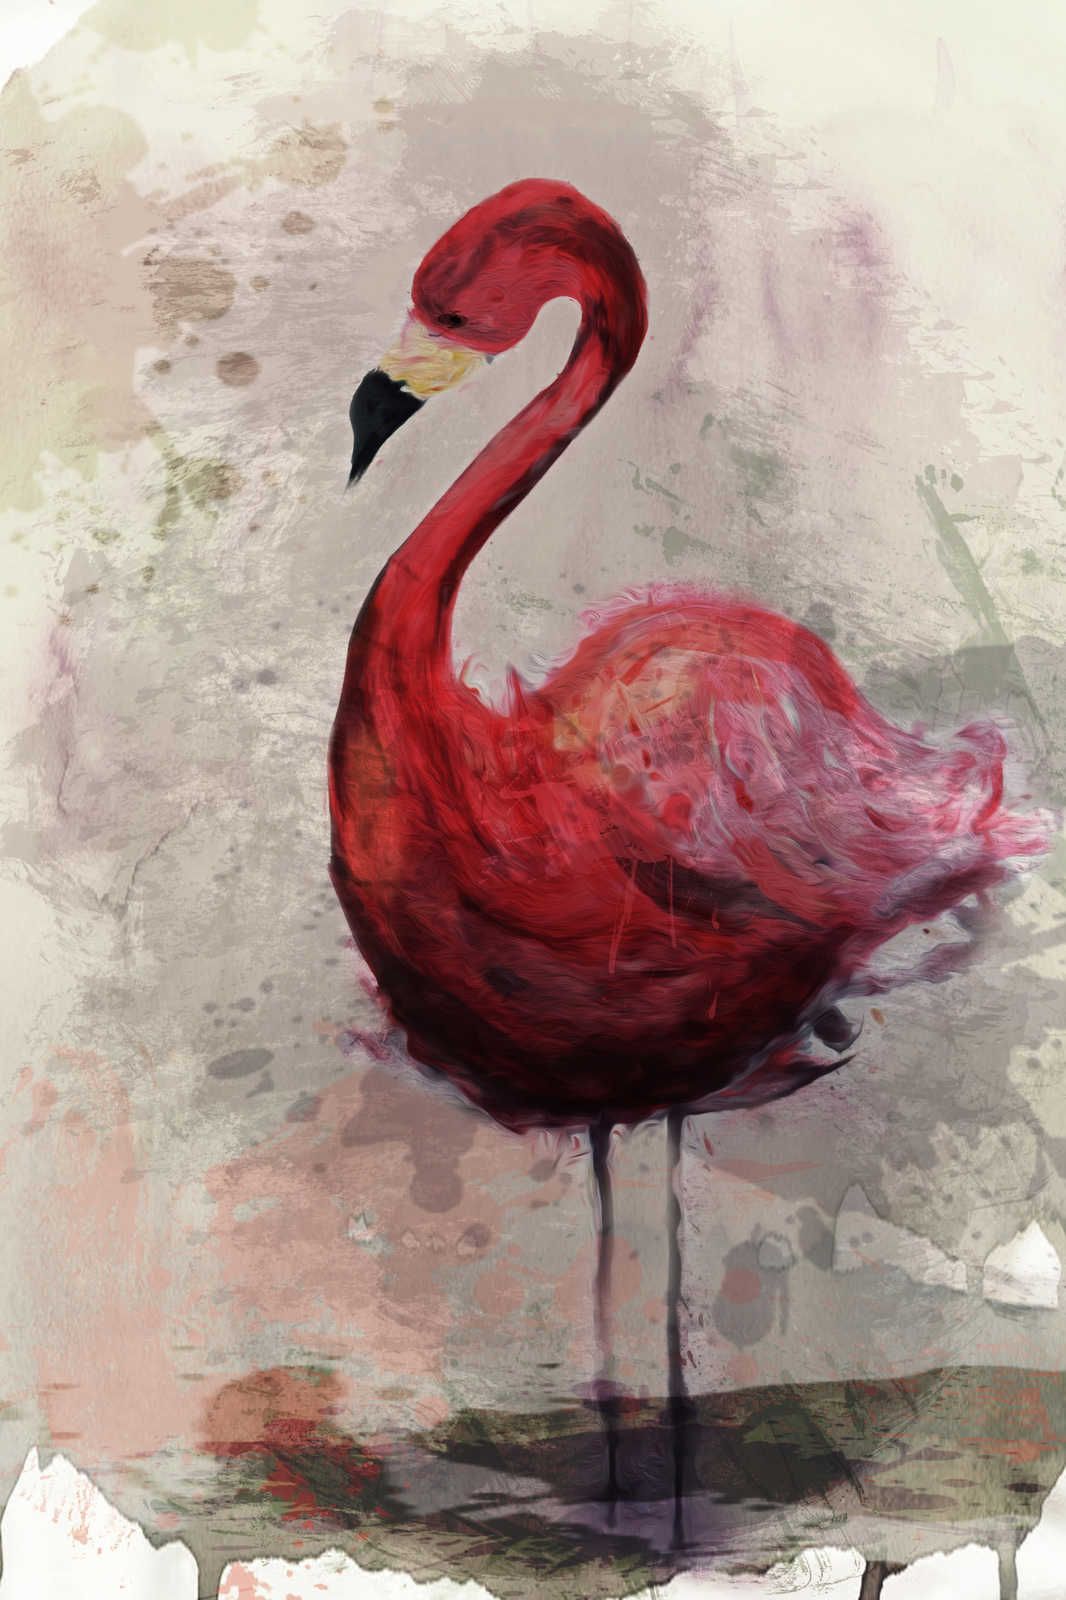             Watercolour Canvas Painting with Flamingo Motif in Drawing Style - 0.90 m x 0.60 m
        